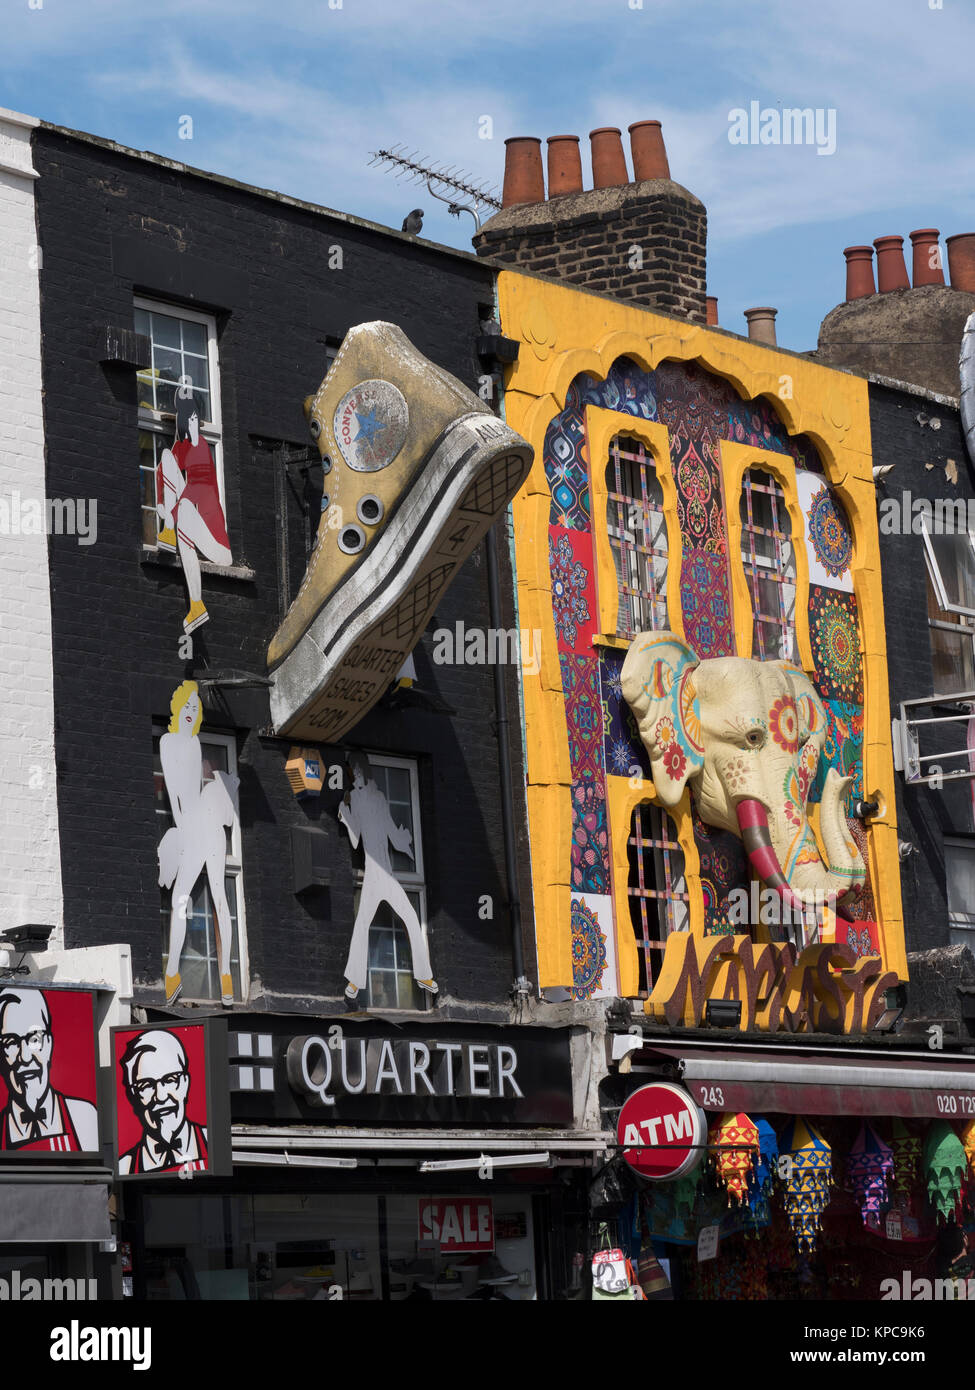 Shop fronts on Hampstead Road Camden Town, near Camden Lock Market, highly  decorated with large scultures of shoes and objects Stock Photo - Alamy